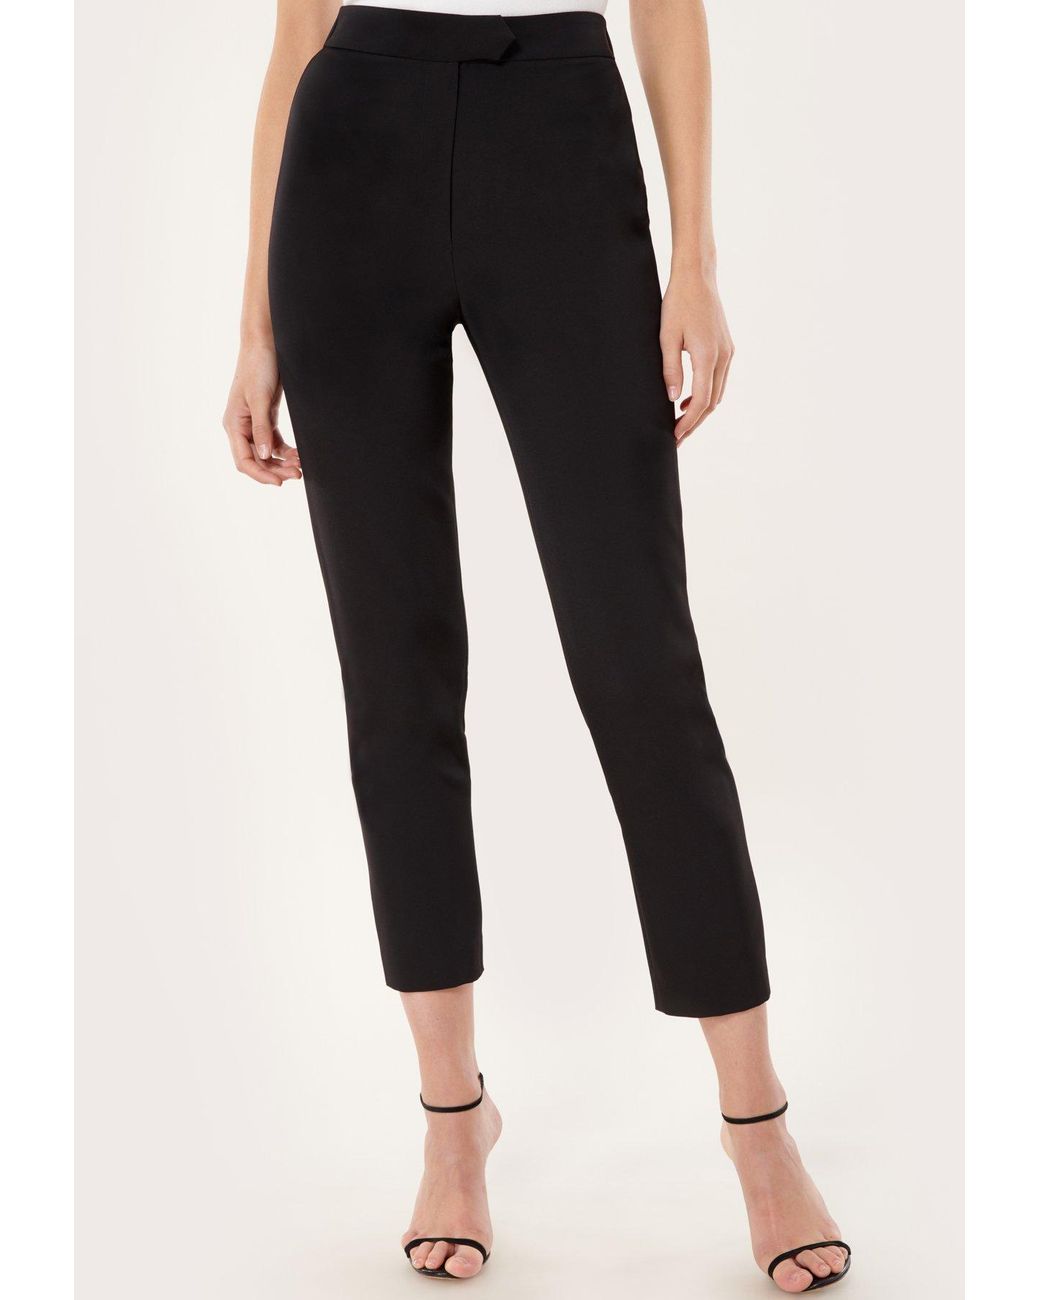 MILLY Synthetic Cady Kristen Elastic Pant in Black - Lyst